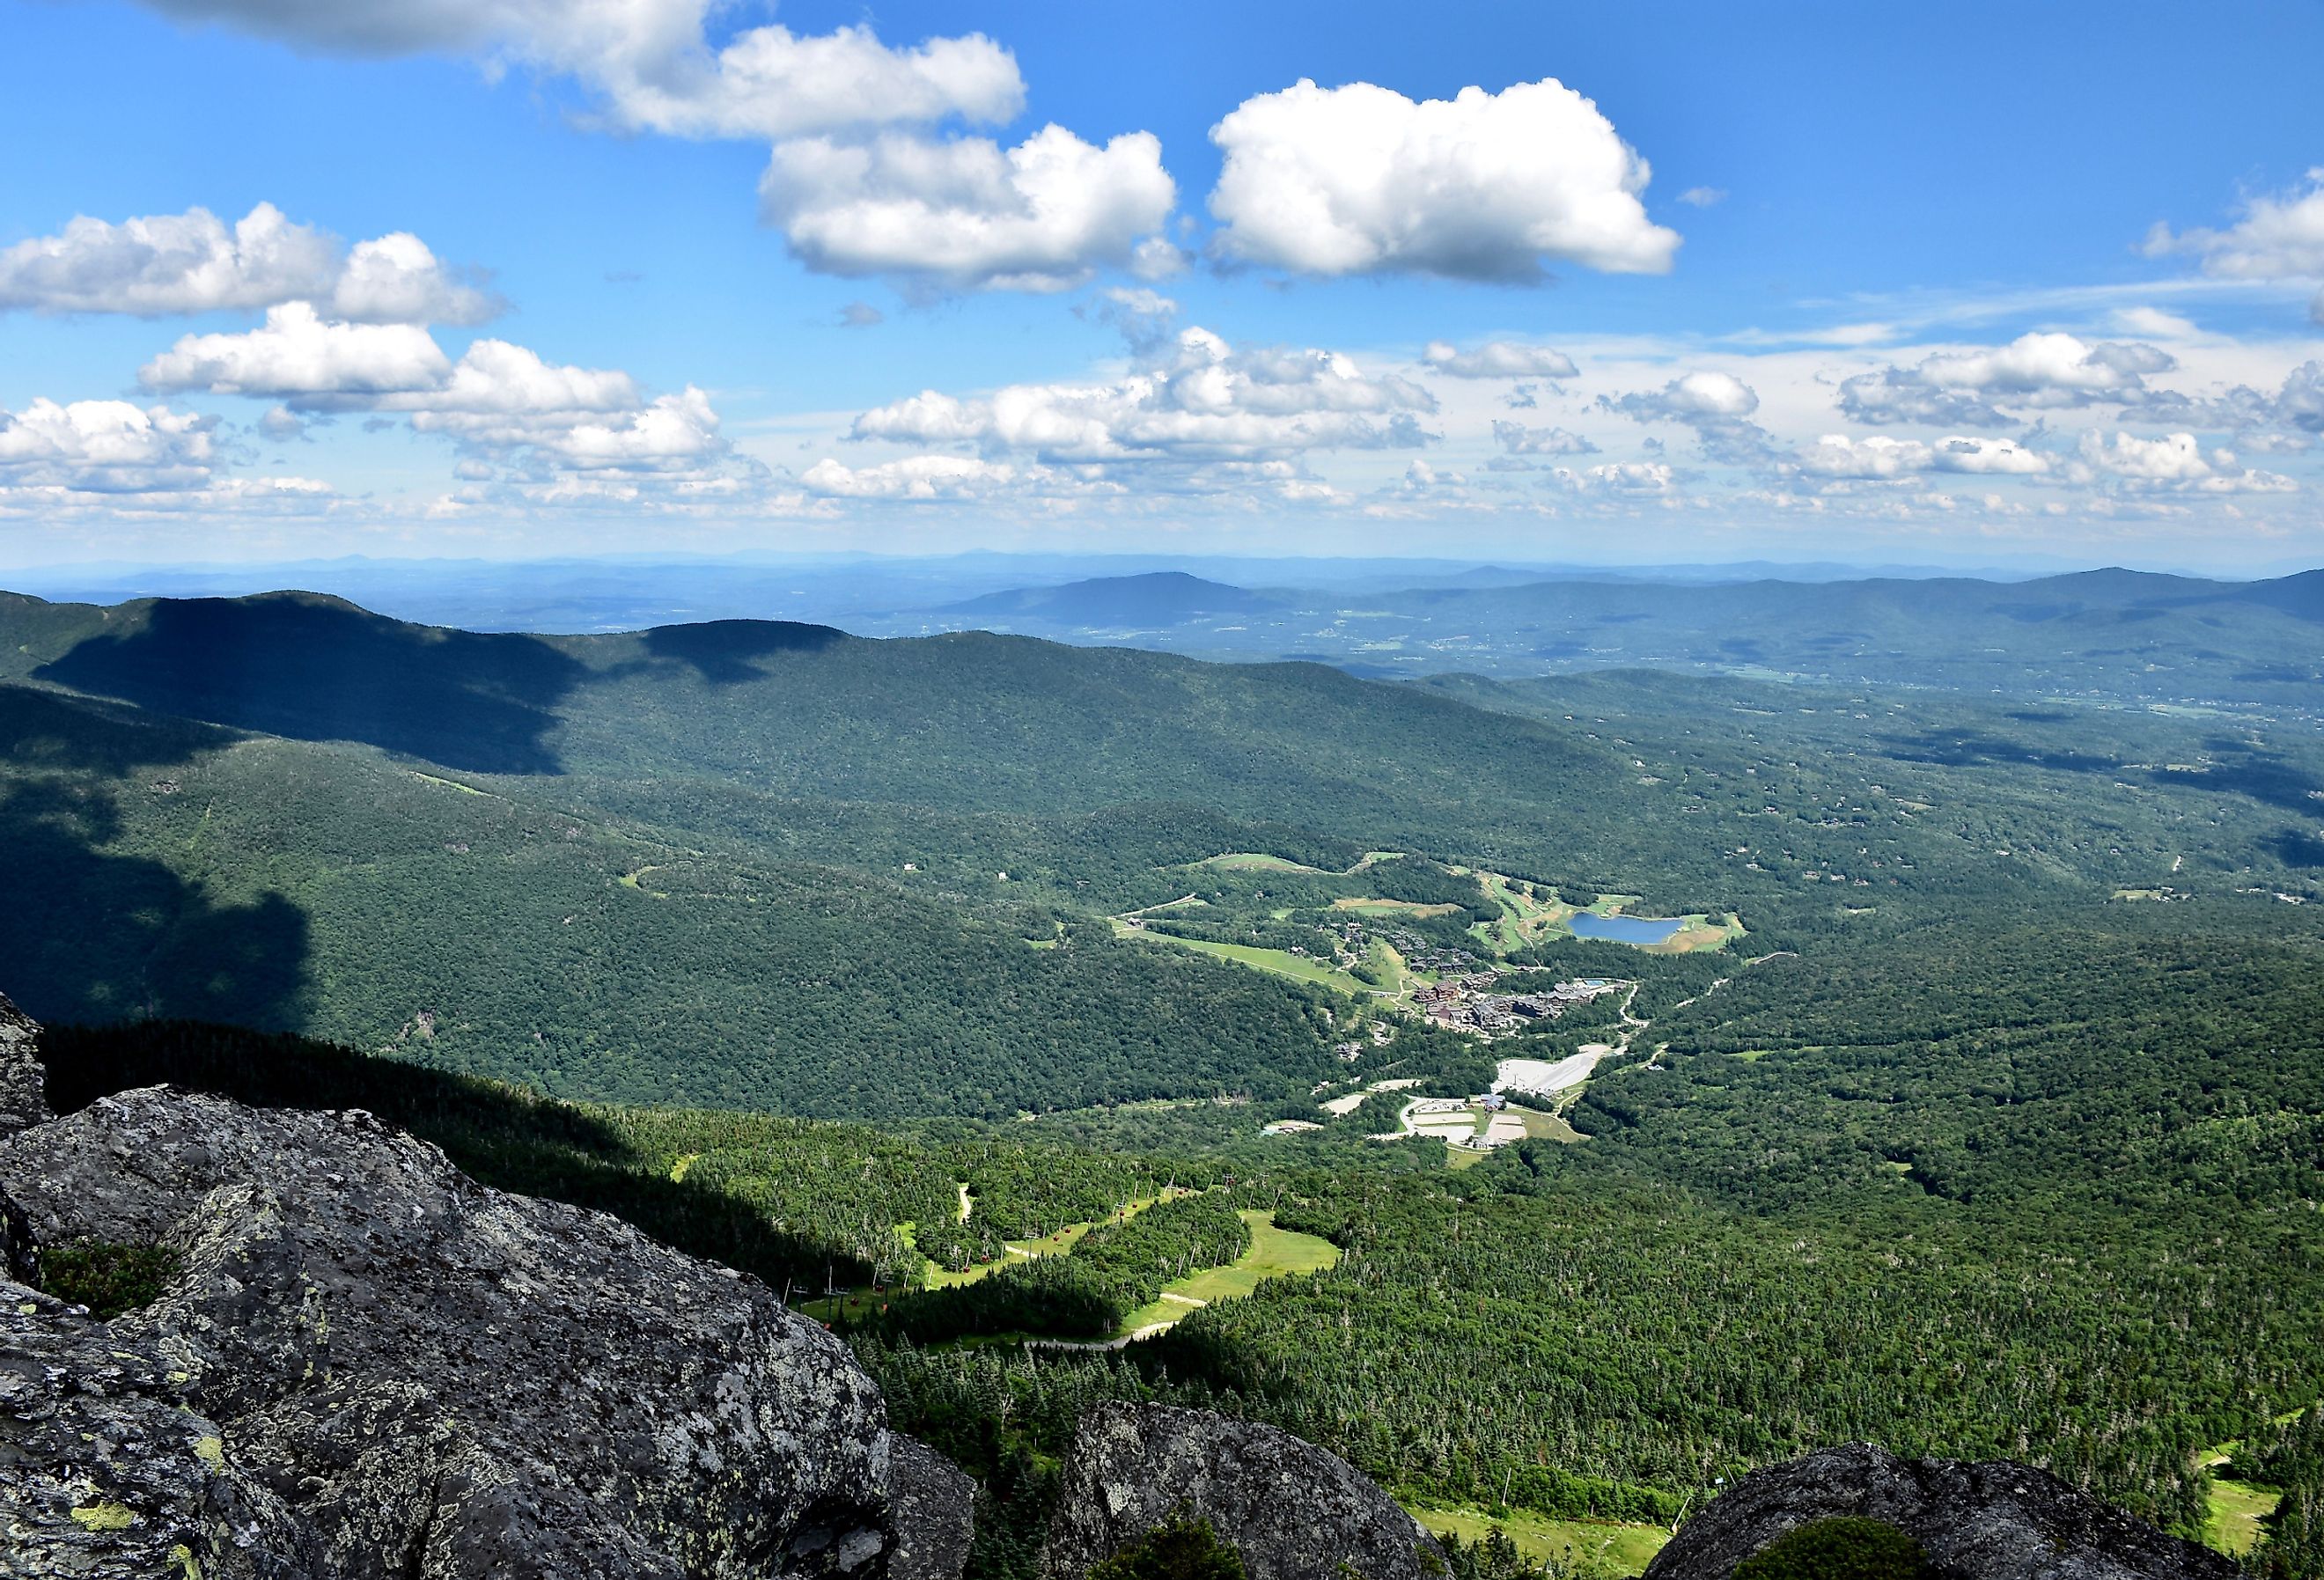 Scenic mountain views while hiking the Long Trail in Stowe, Vermont in summer. Image credit Monika Salvan via Shutterstock.